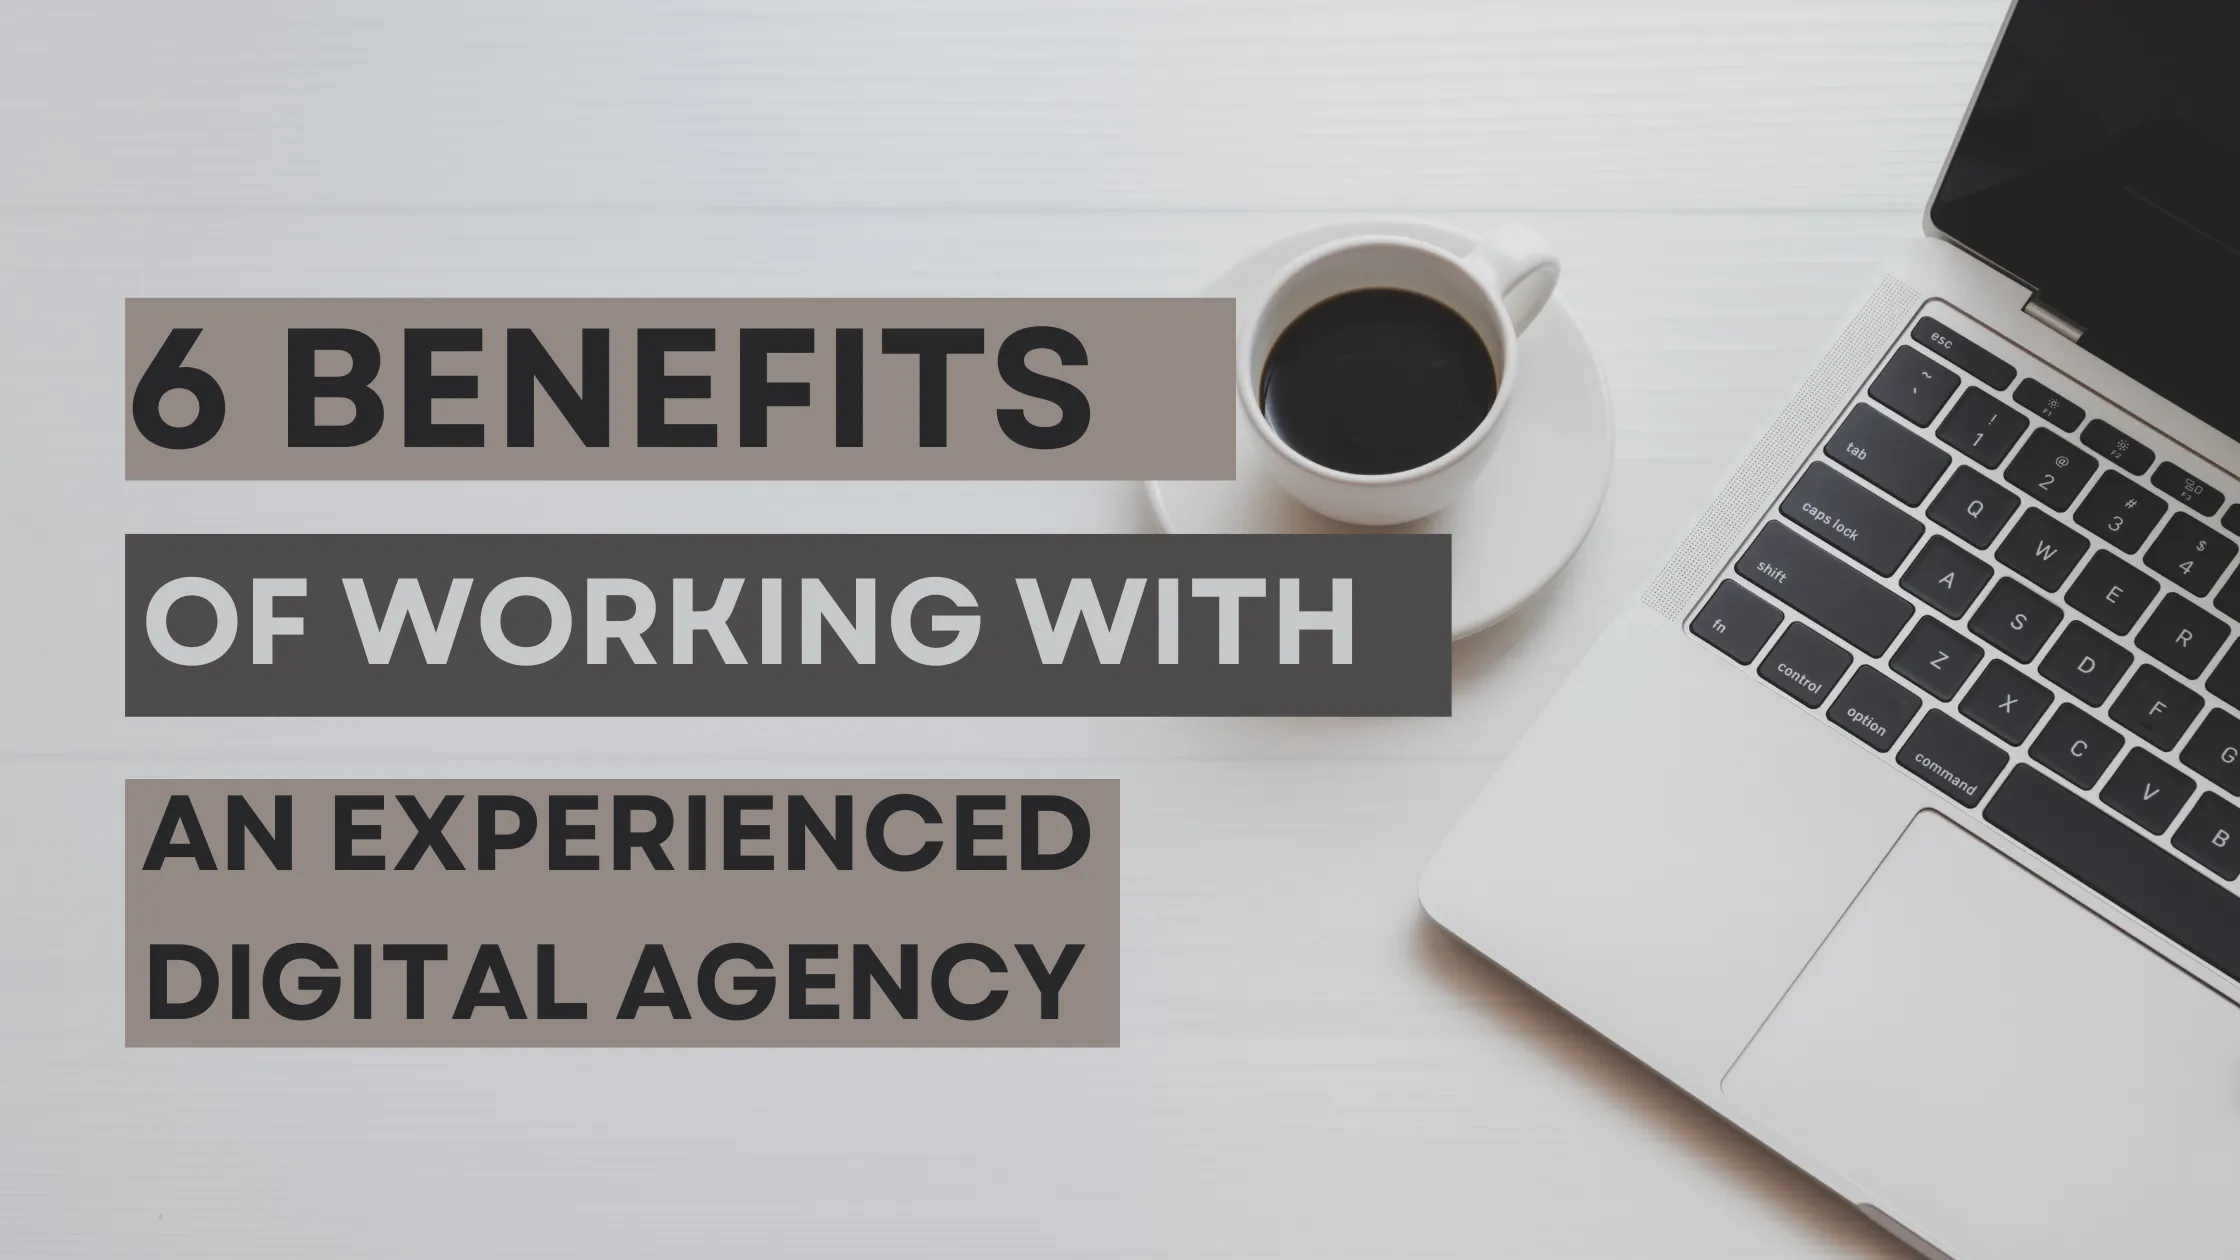 The Benefits Of Working With An Experienced Digital Agency